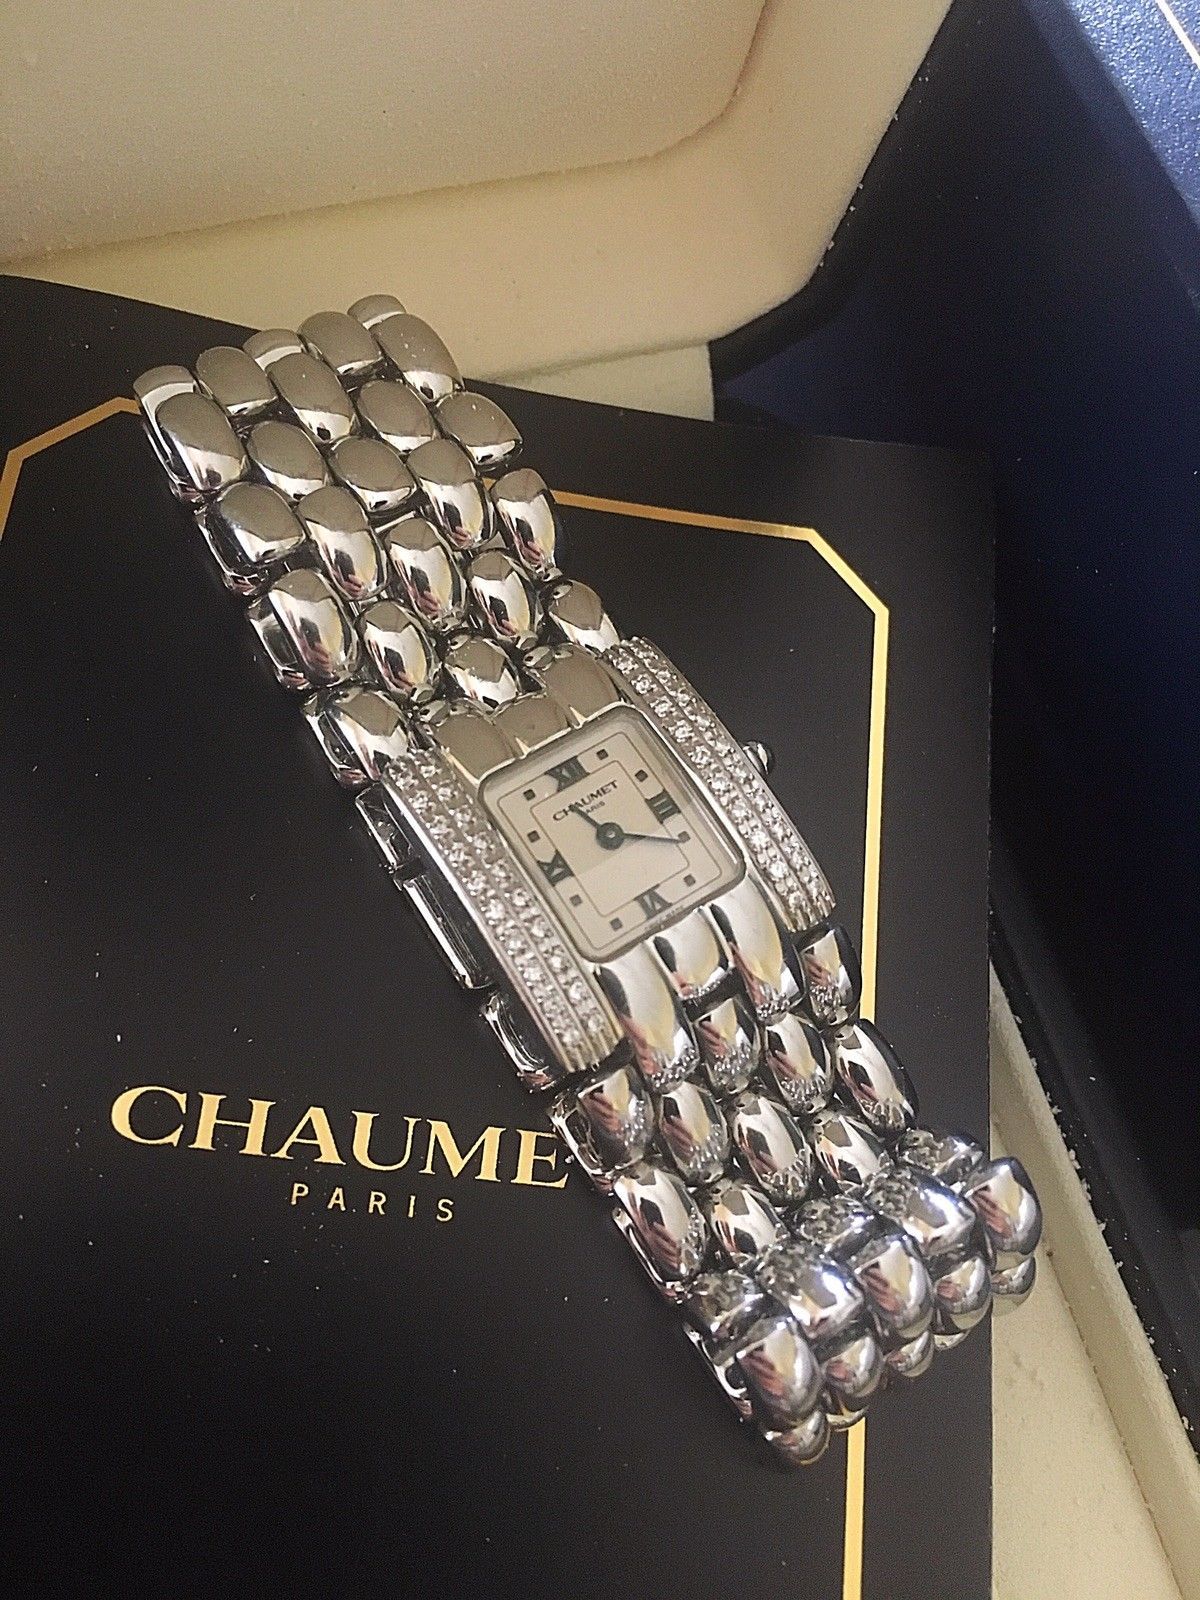 Discovering Chaumet